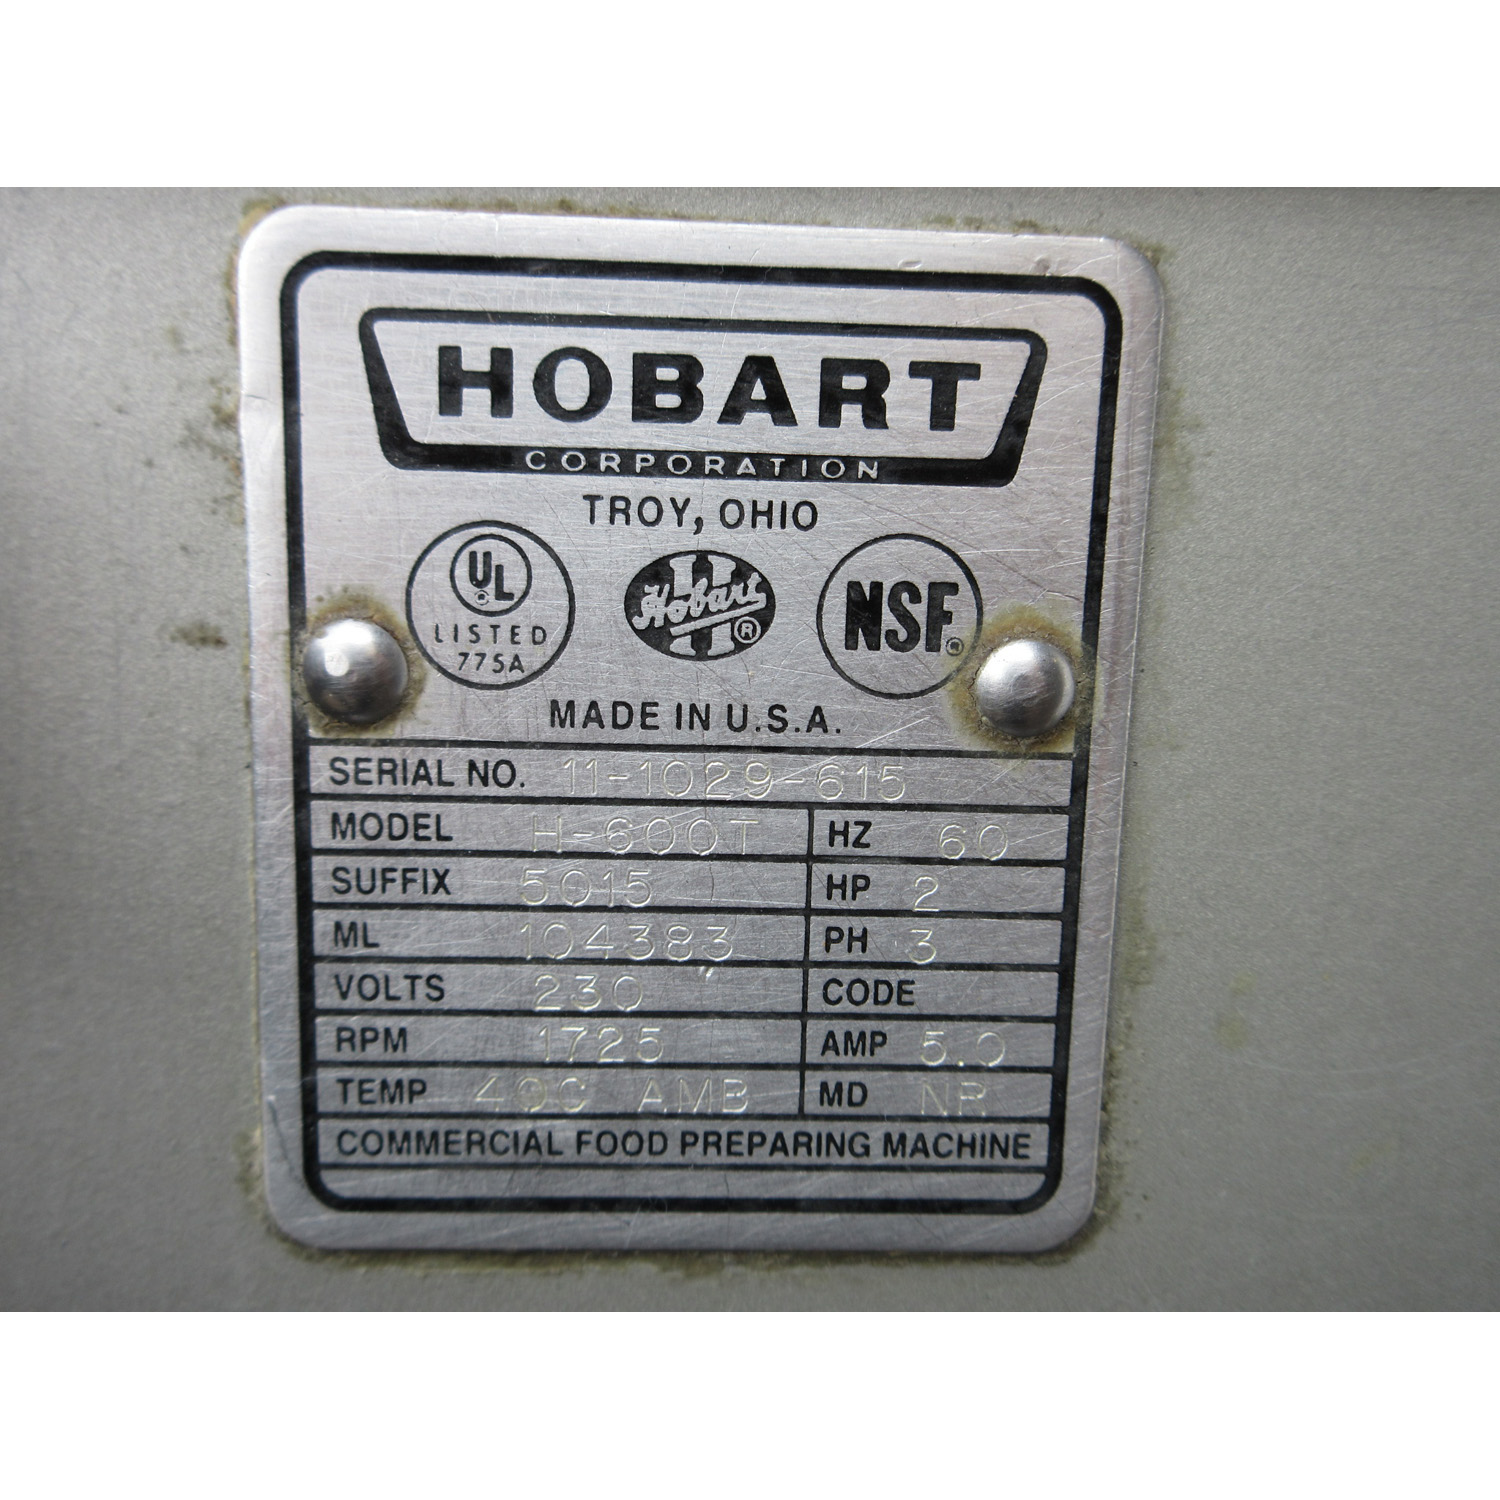 Hobart 60 Quart H600T Mixer, Used Excellent Condition image 4